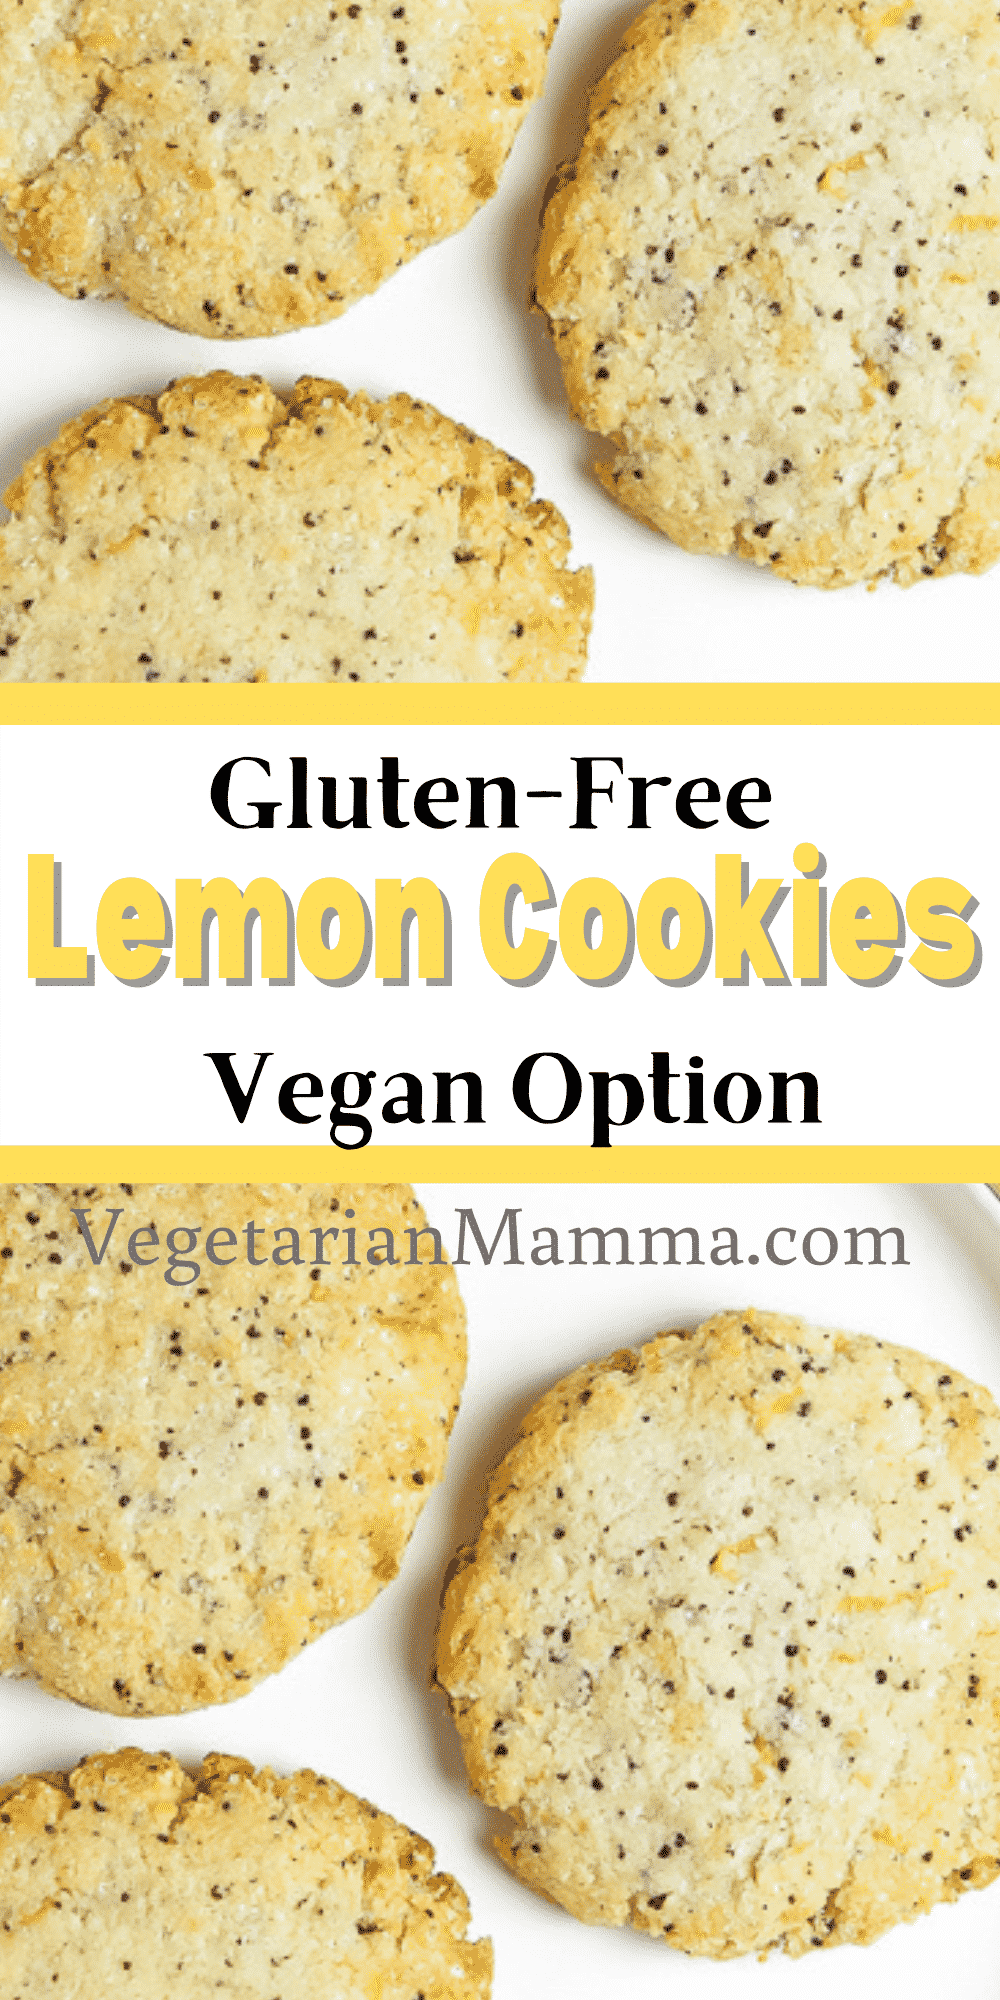 These Gluten-Free Lemon Cookies are so easy and delicious with so much lemony flavor! Make them vegan with one simple swap for a chewy, crunchy cookie everyone will love. #vegancookies #glutenfreebaking